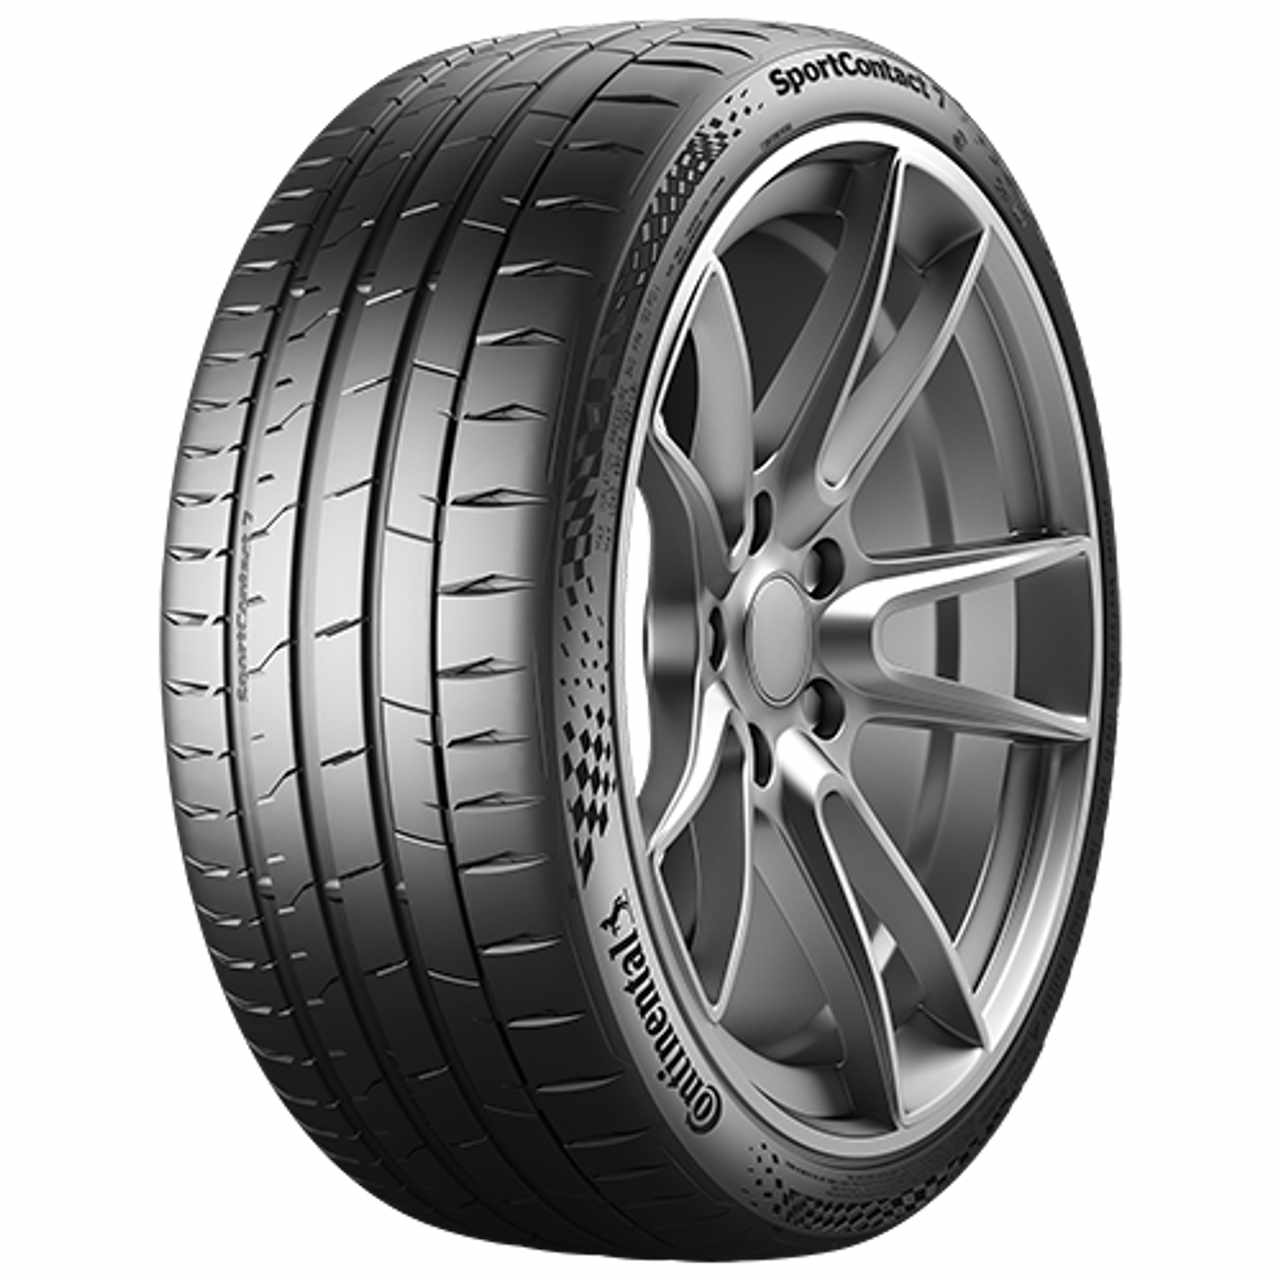 CONTINENTAL SPORTCONTACT 7 (*) (EVc) 225/45R18 95Y CONTISILENT FR BSW von Continental